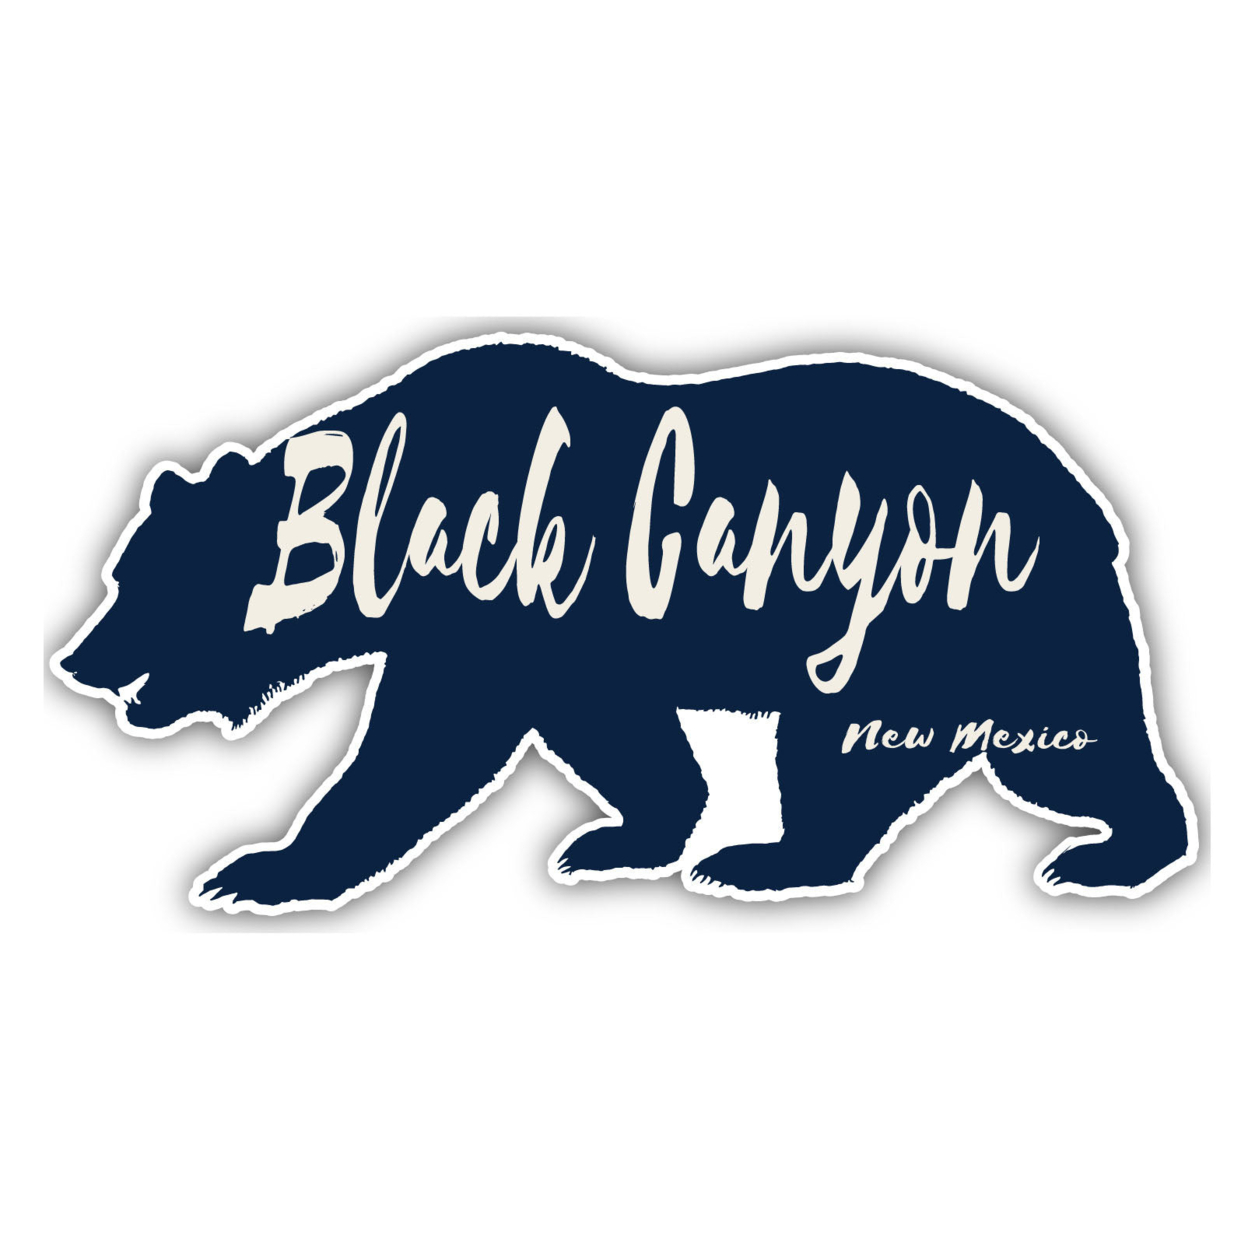 Black Canyon New Mexico Souvenir Decorative Stickers (Choose Theme And Size) - 4-Pack, 12-Inch, Bear